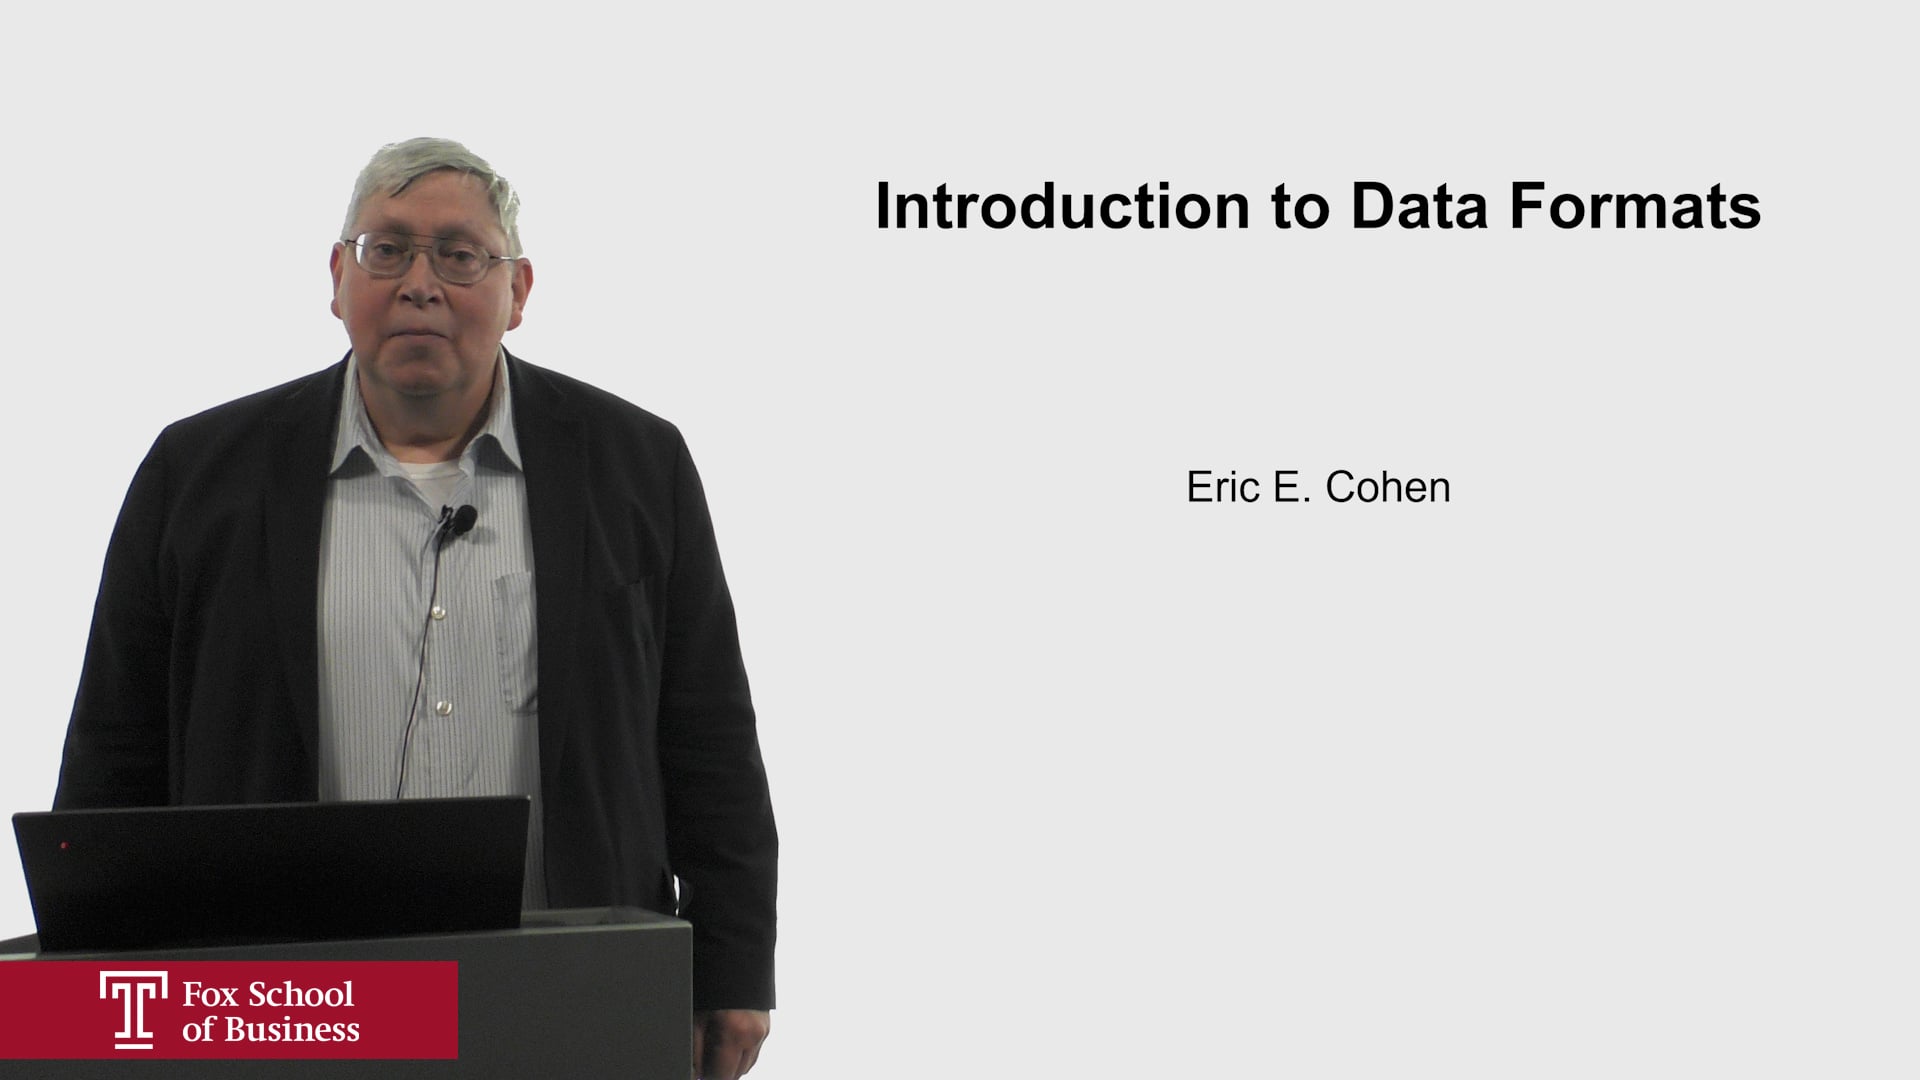 Introduction to Data Formats